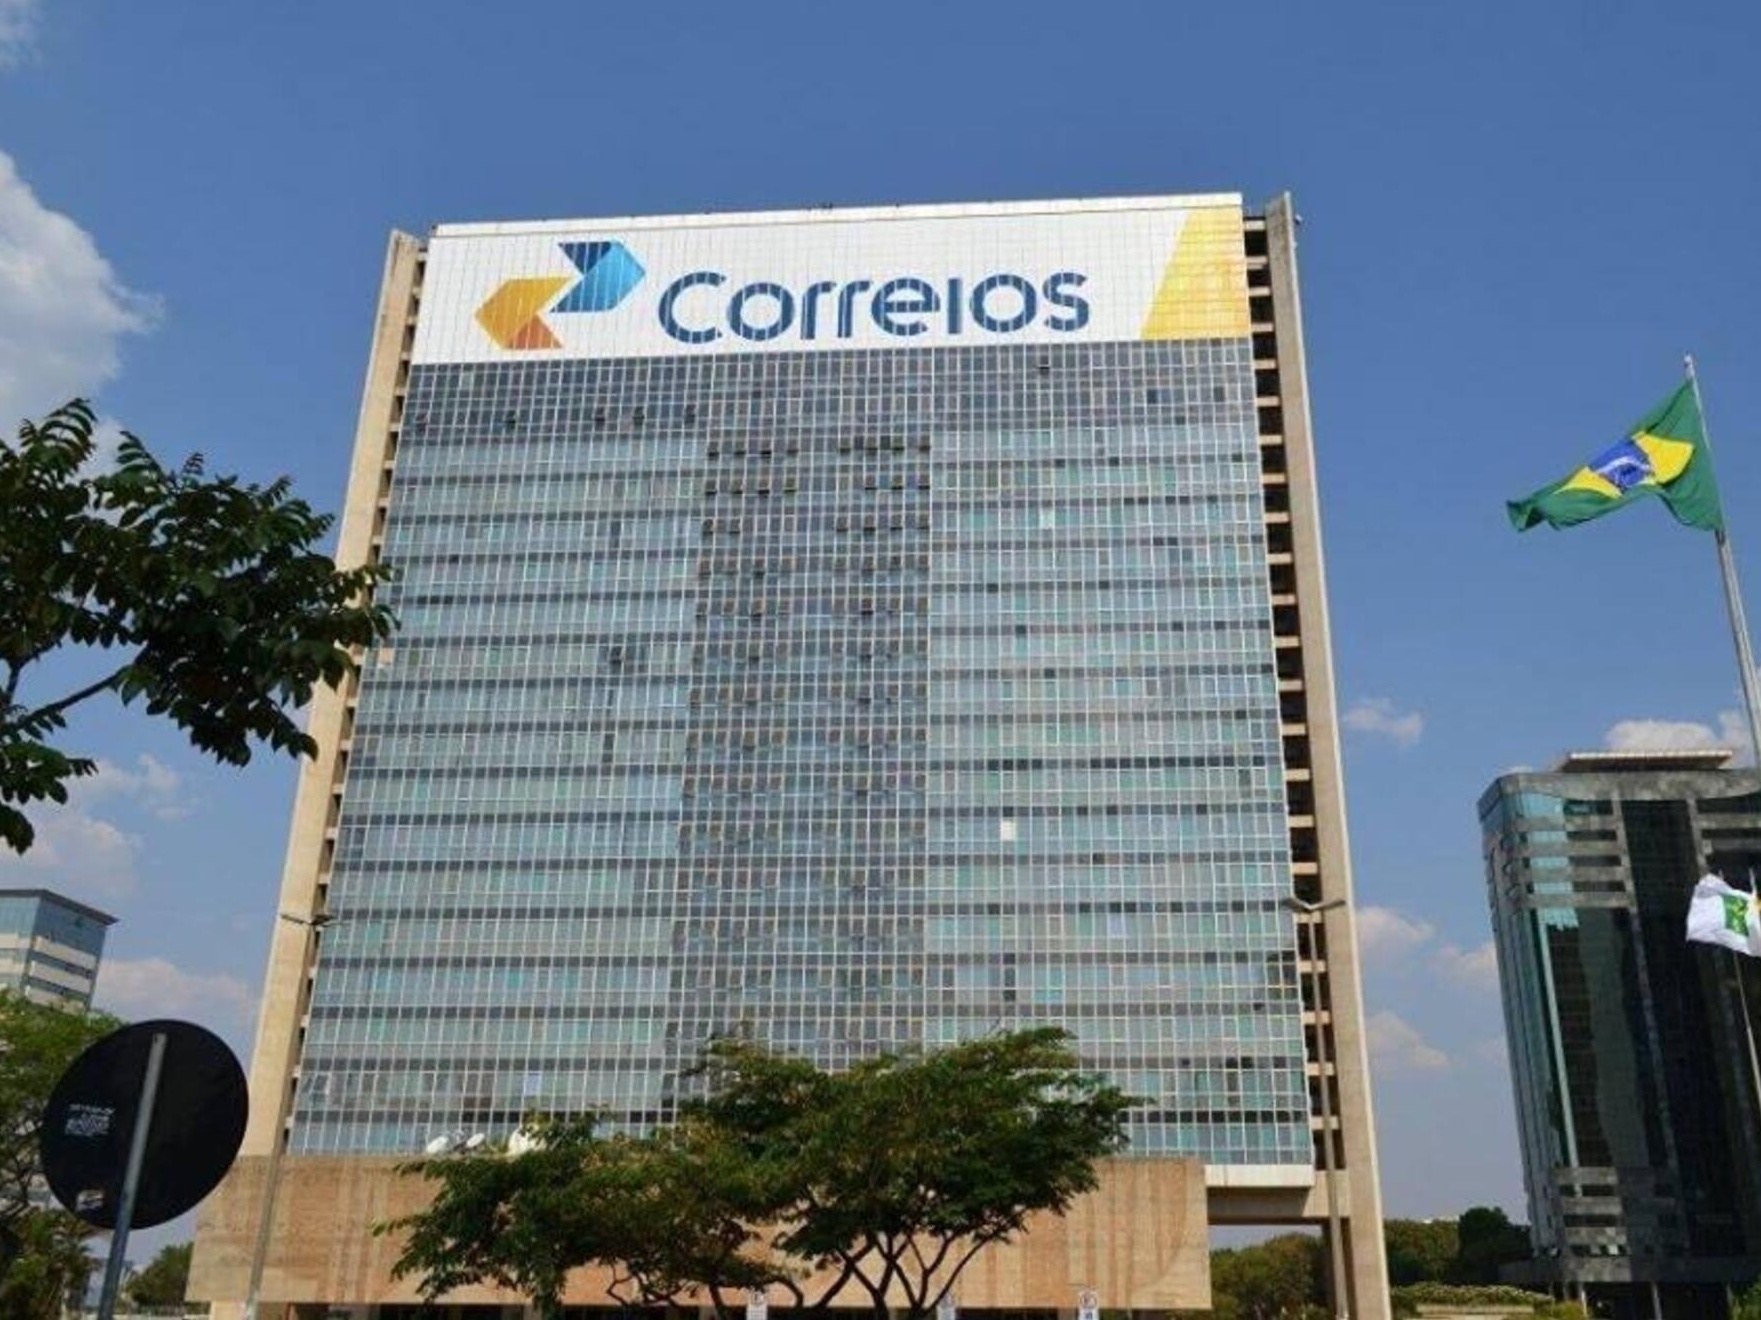 Correios is considered one of the world's largest companies in the delivery sector. (Photo internet reproduction)